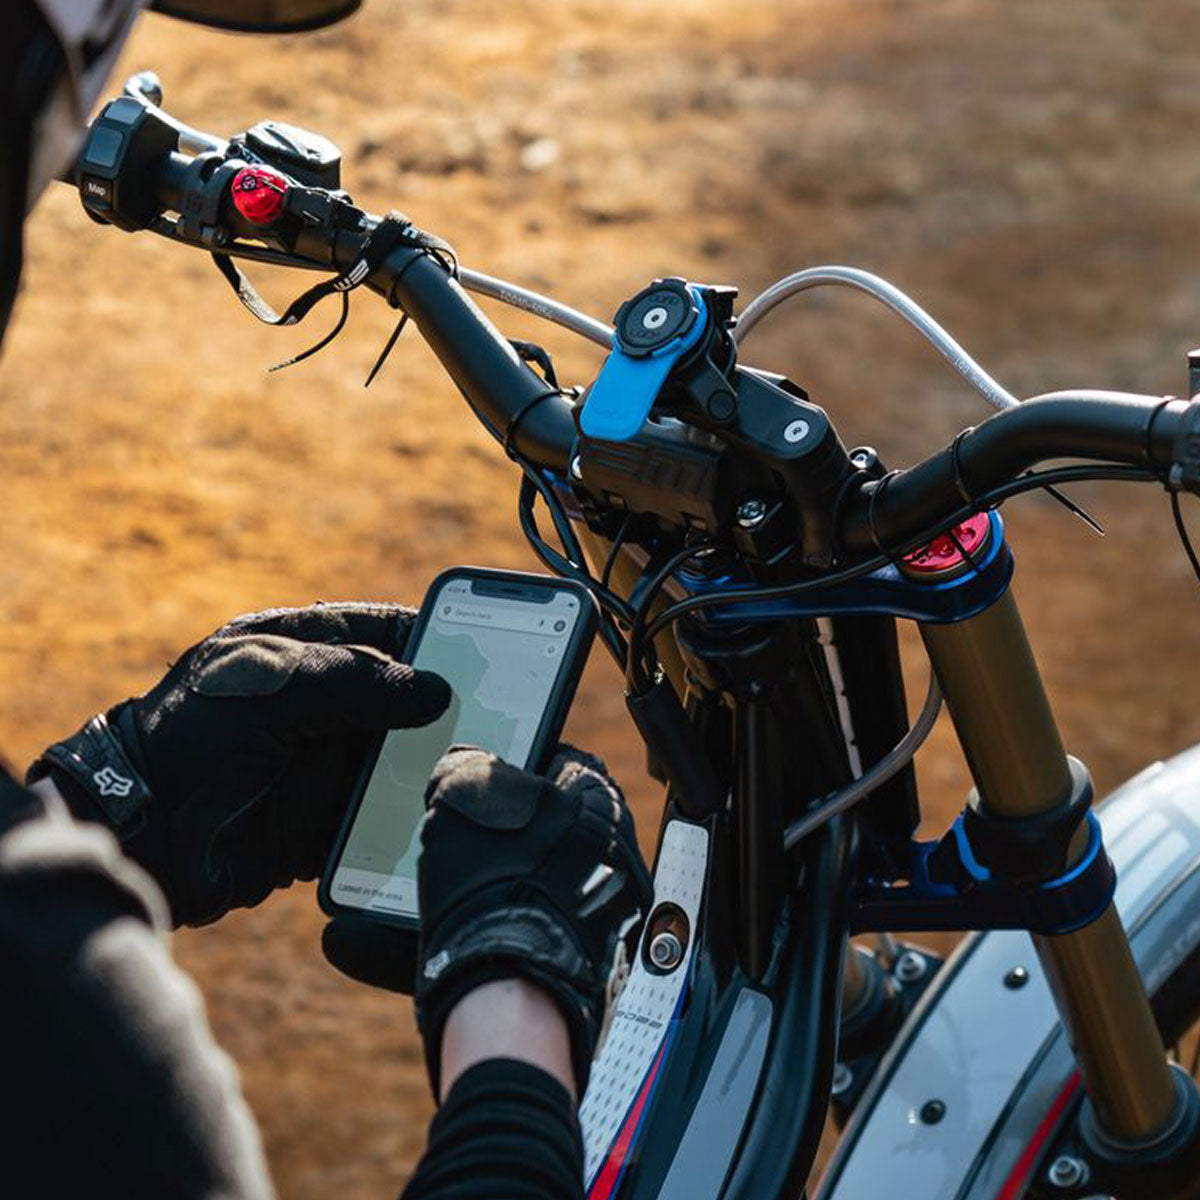 Quad Lock Review: Is It The Best Motorcycle Phone Mount?